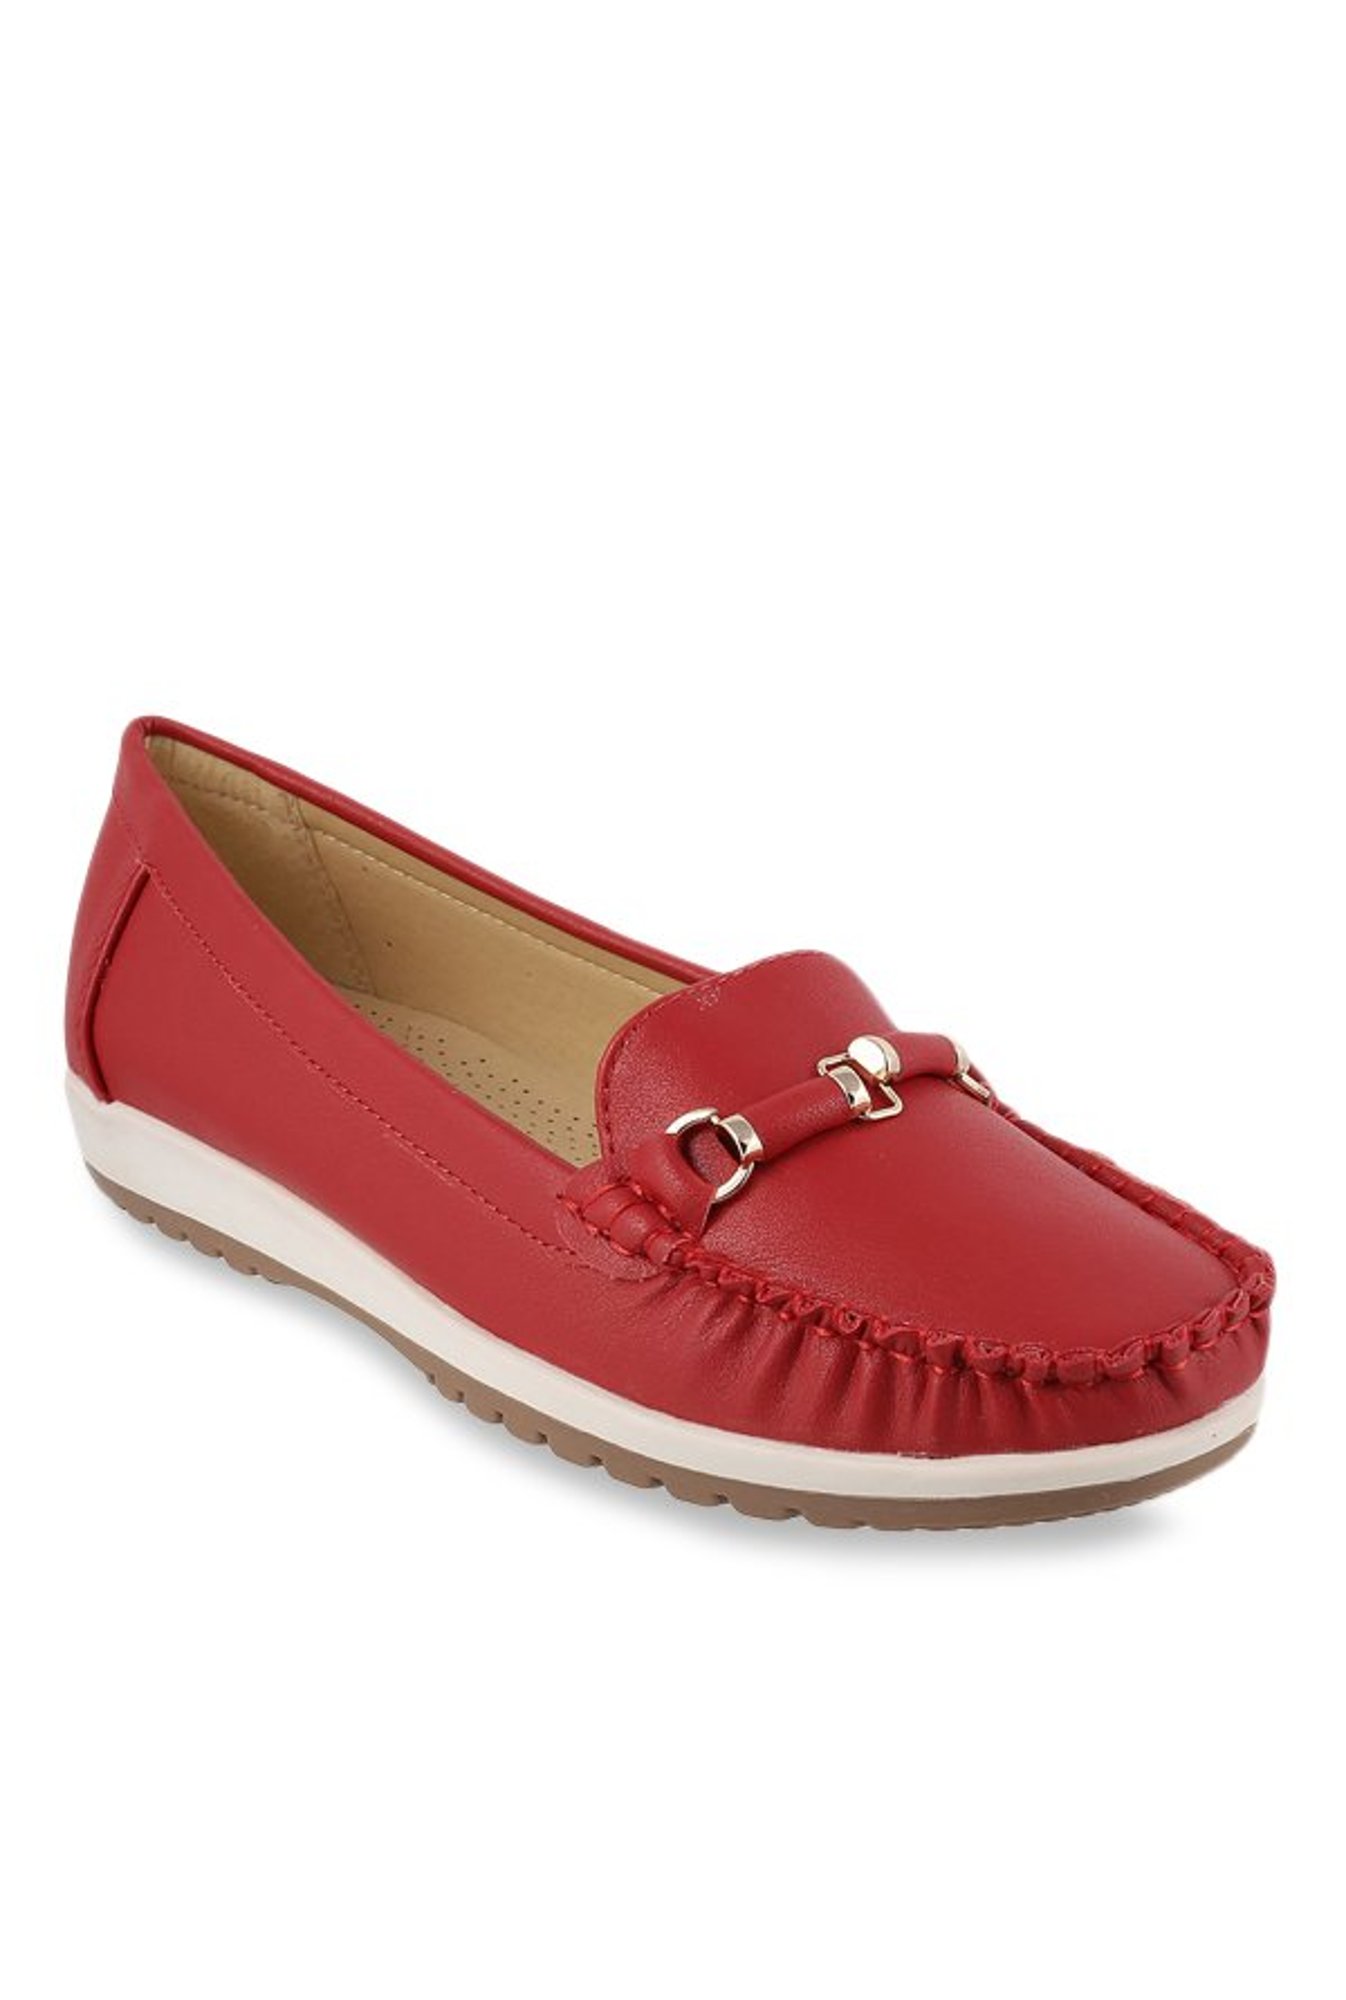 red heeled loafers